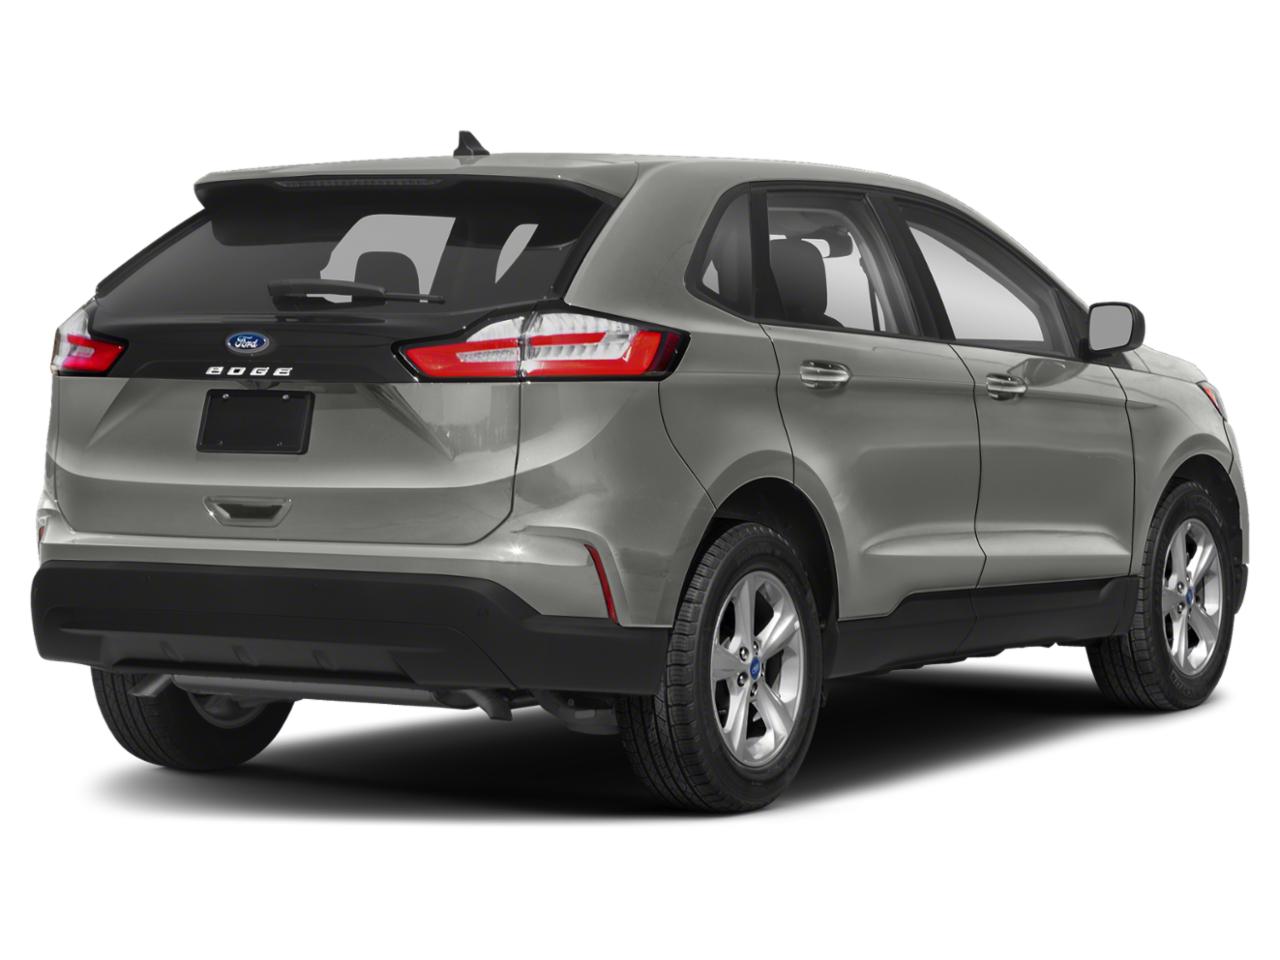 New 2021 Ford Edge for Sale at Blackwell Ford, Inc.